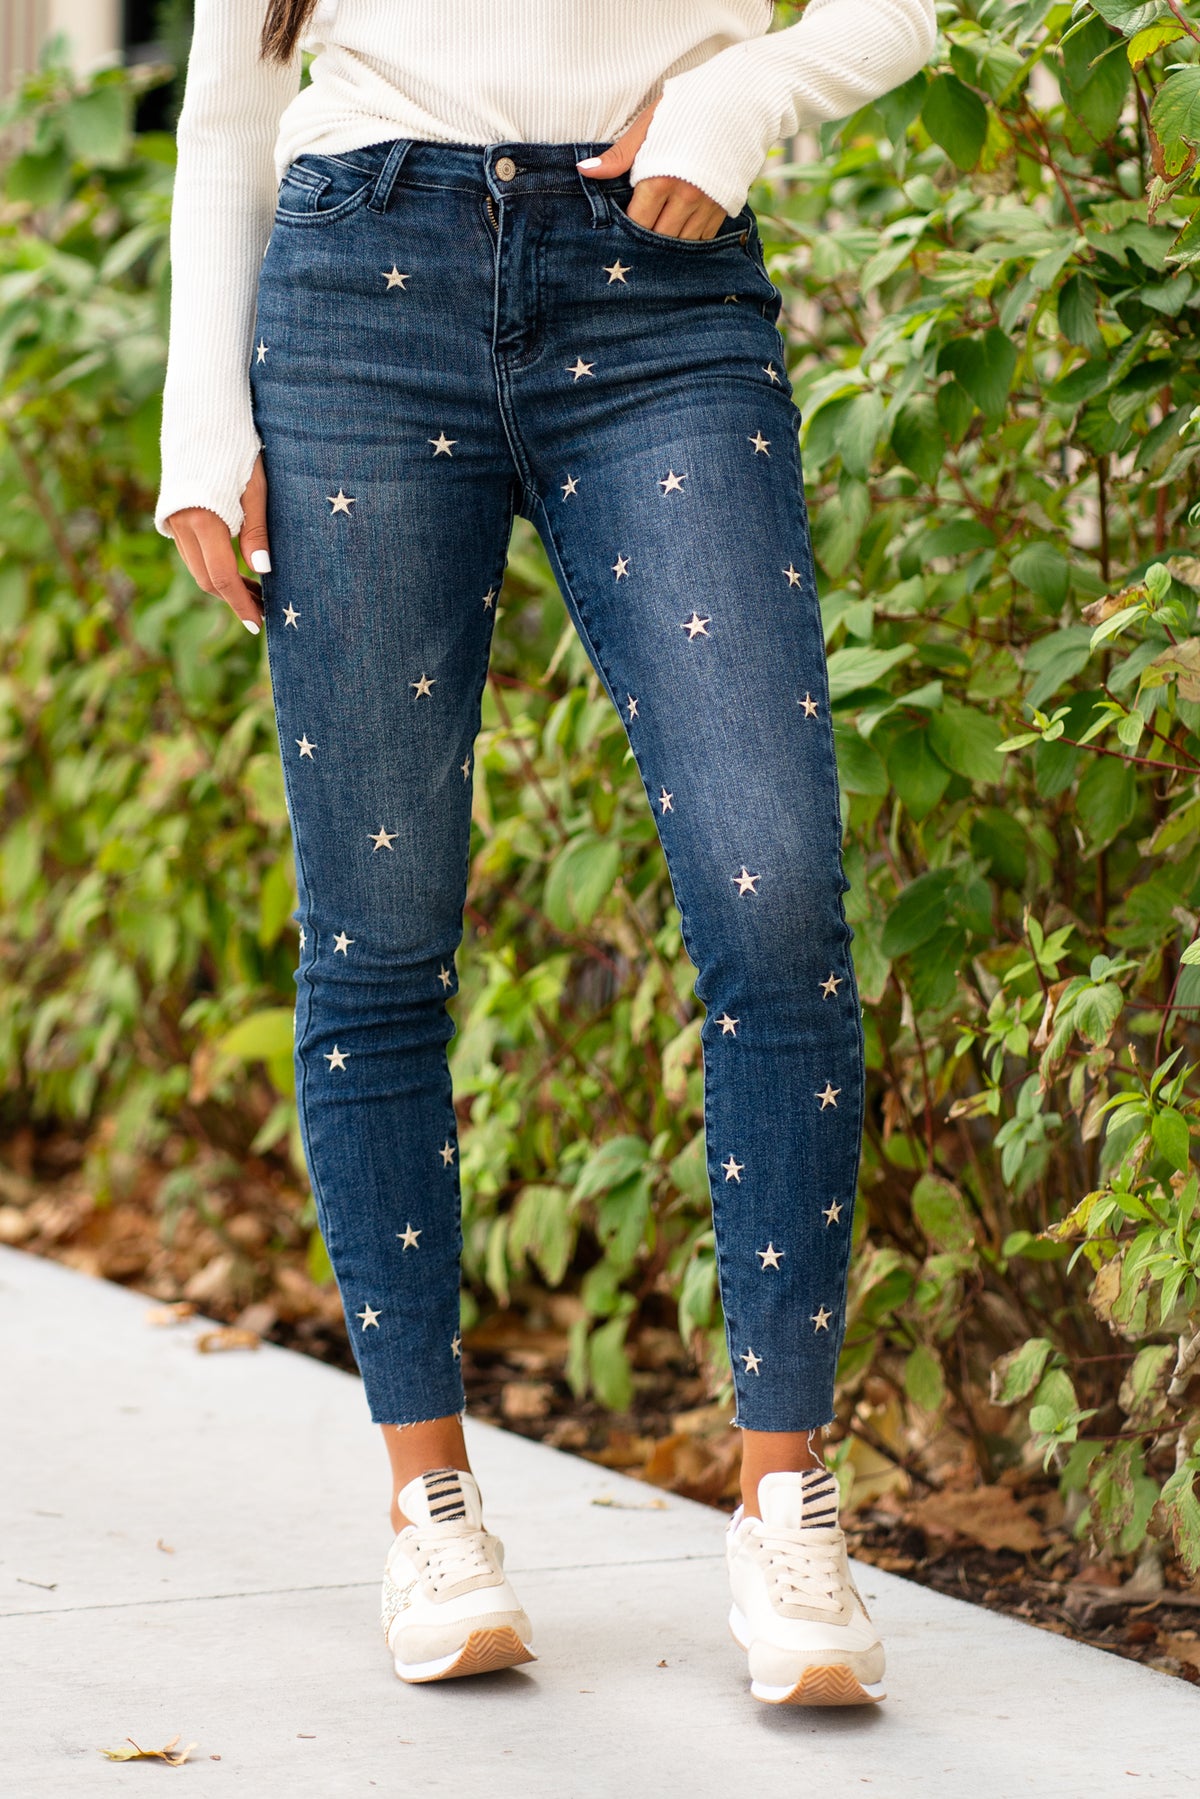 Judy Blue  Don't be afraid to wear high-waisted jeans, especially these star embroidered ones. With a dark blue wash, these will be new favorites!   Color: Dark Blue Cut: Skinny, 28.5" Inseam* Rise: High Rise, 10.5" Front Rise* Machine Wash Separately In Cold Water Stitching: Classic Material:   92% Cotton / 7% Polyester / 1% Spandex Fly: Zipper Style #: JB88264 , 88264 Contact us for any additional measurements or sizing.    *Measured on the smallest size, measurements may vary by size. 